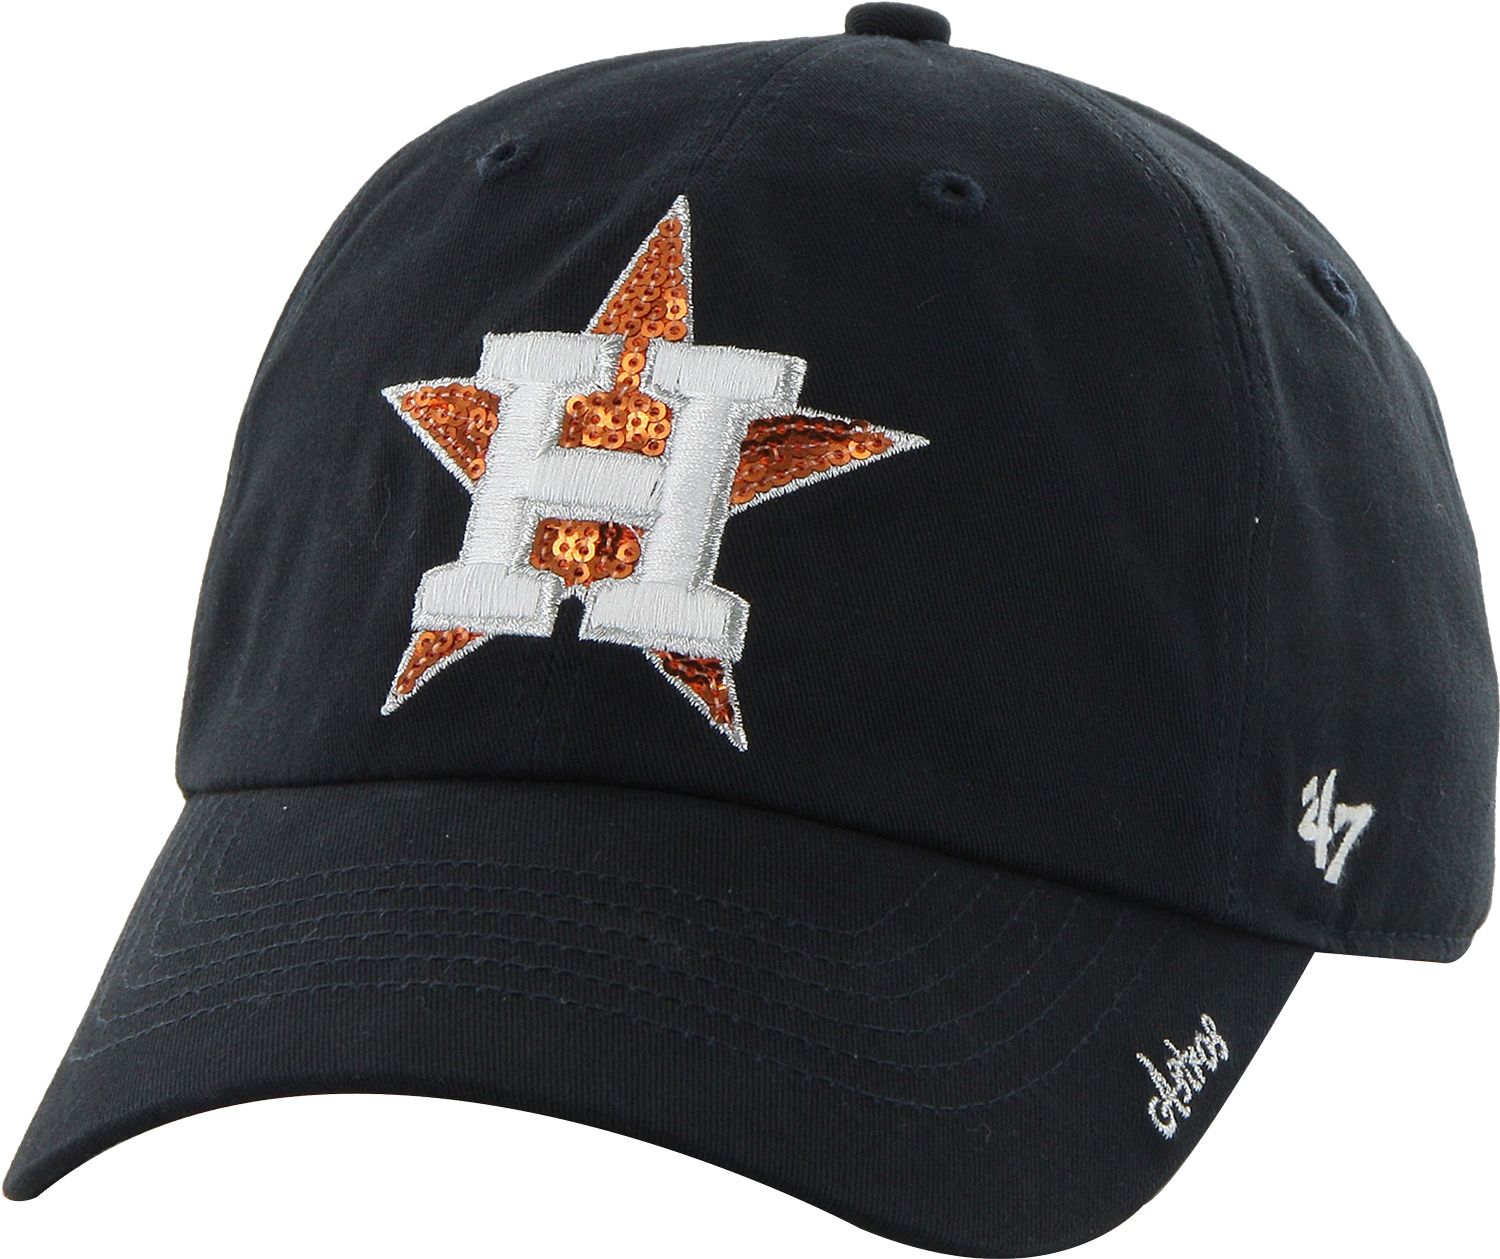 NEW! '47 Brand Women's Houston Astros '47 Clean Up Navy Adjustable -  clothing & accessories - by owner - apparel sale